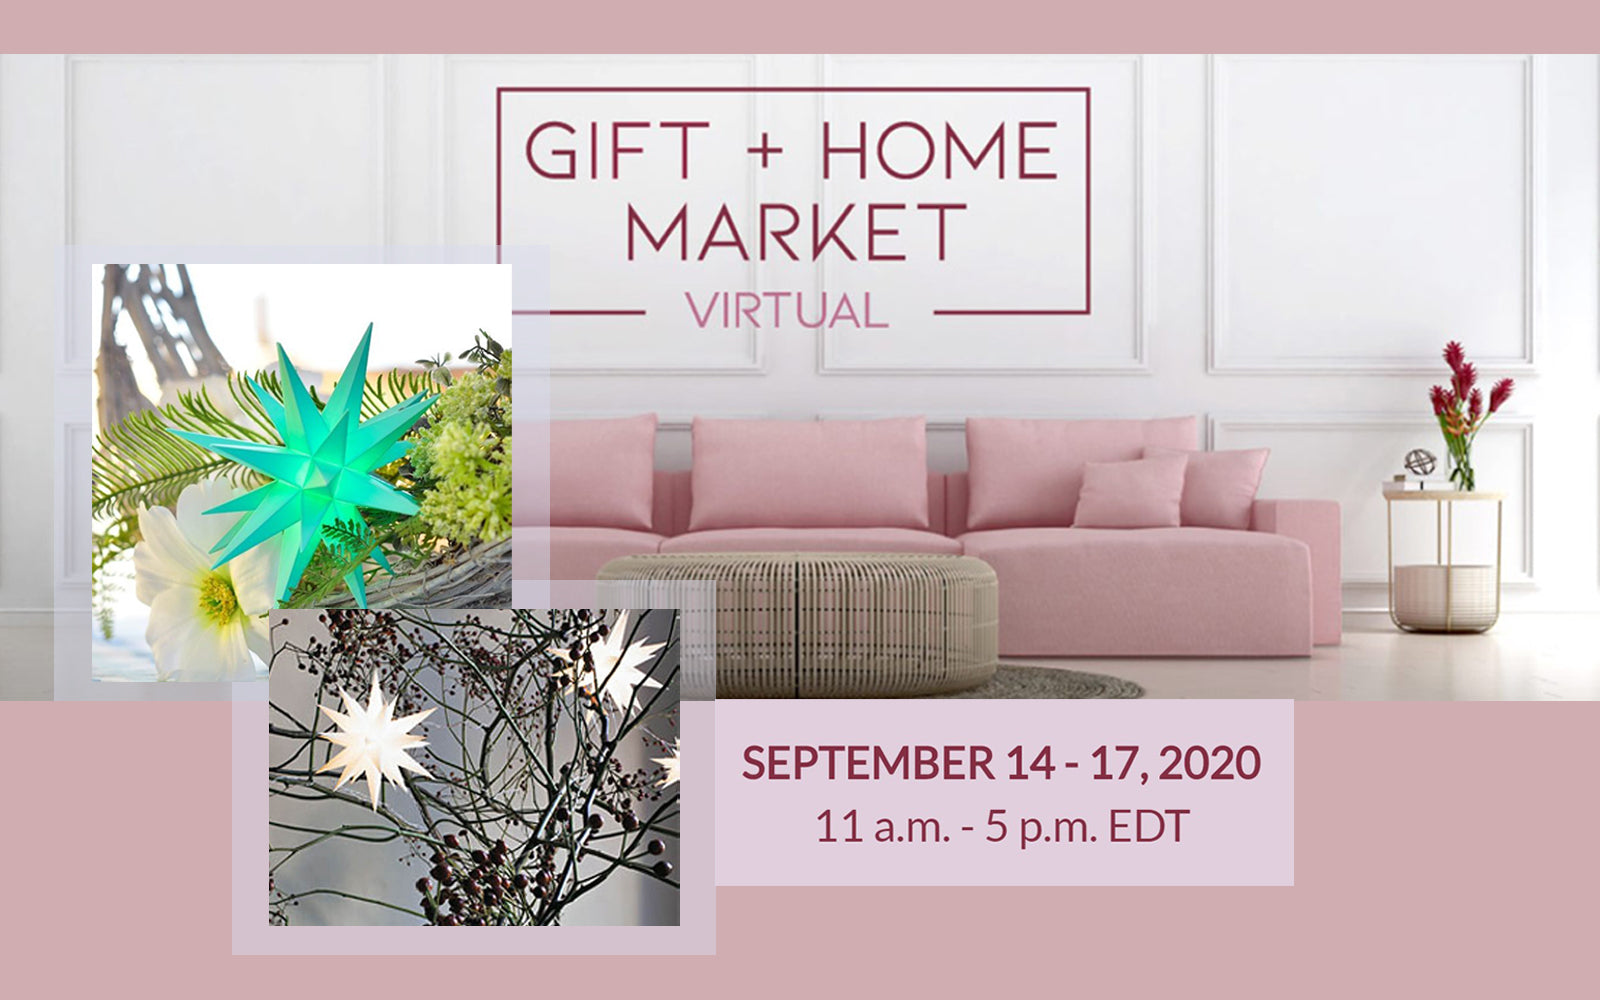 FIND US AT THE VIRTUAL TORONTO GIFT + HOME MARKET!